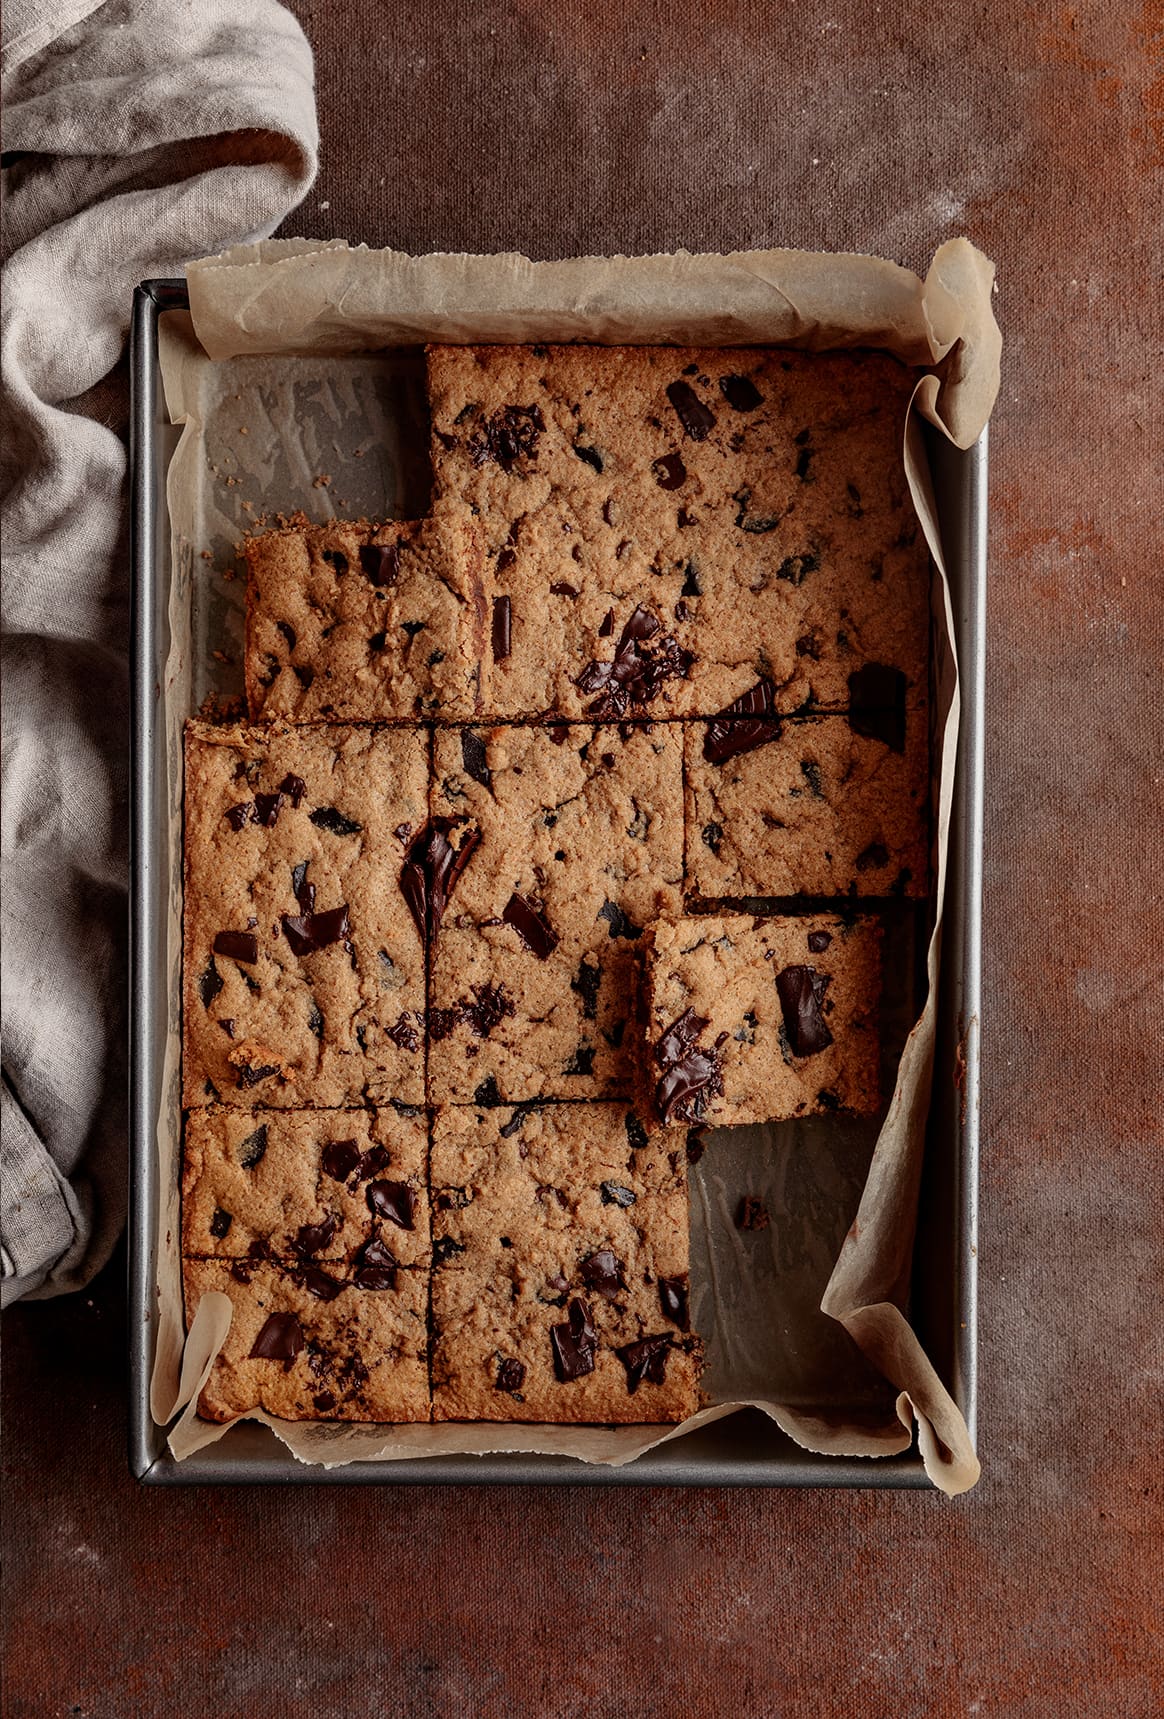 https://yogaofcooking.co/wp-content/uploads/2020/11/almond-butter-chocolate-chip-bars-1.jpg